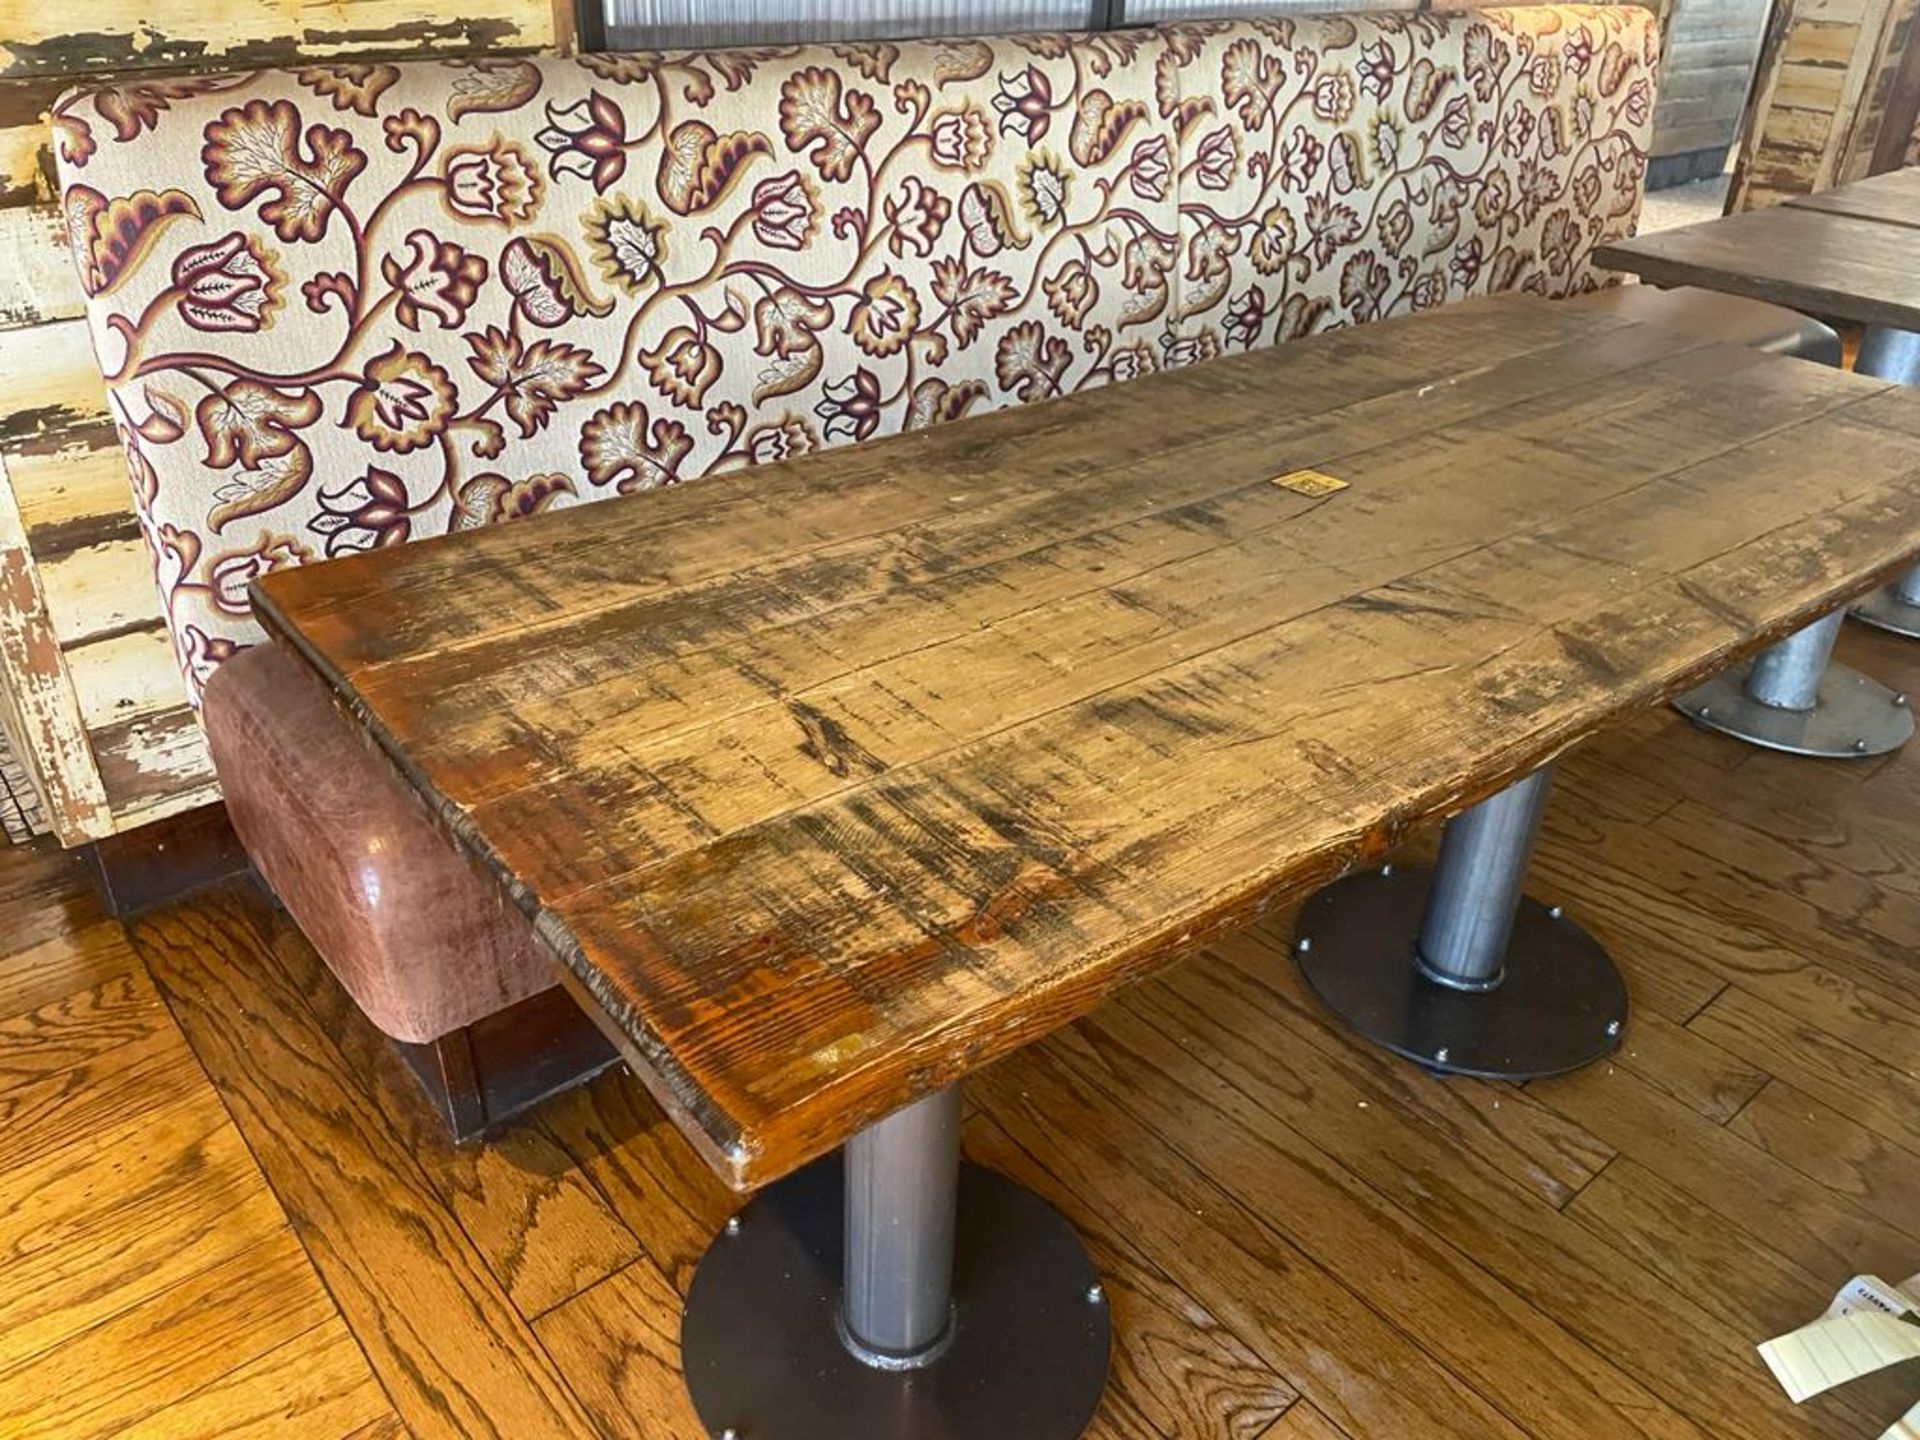 1 x Rectangular Restaurant Dining Table Featuring Industrial Pedestal Bases and Rustic Solid - Image 4 of 7